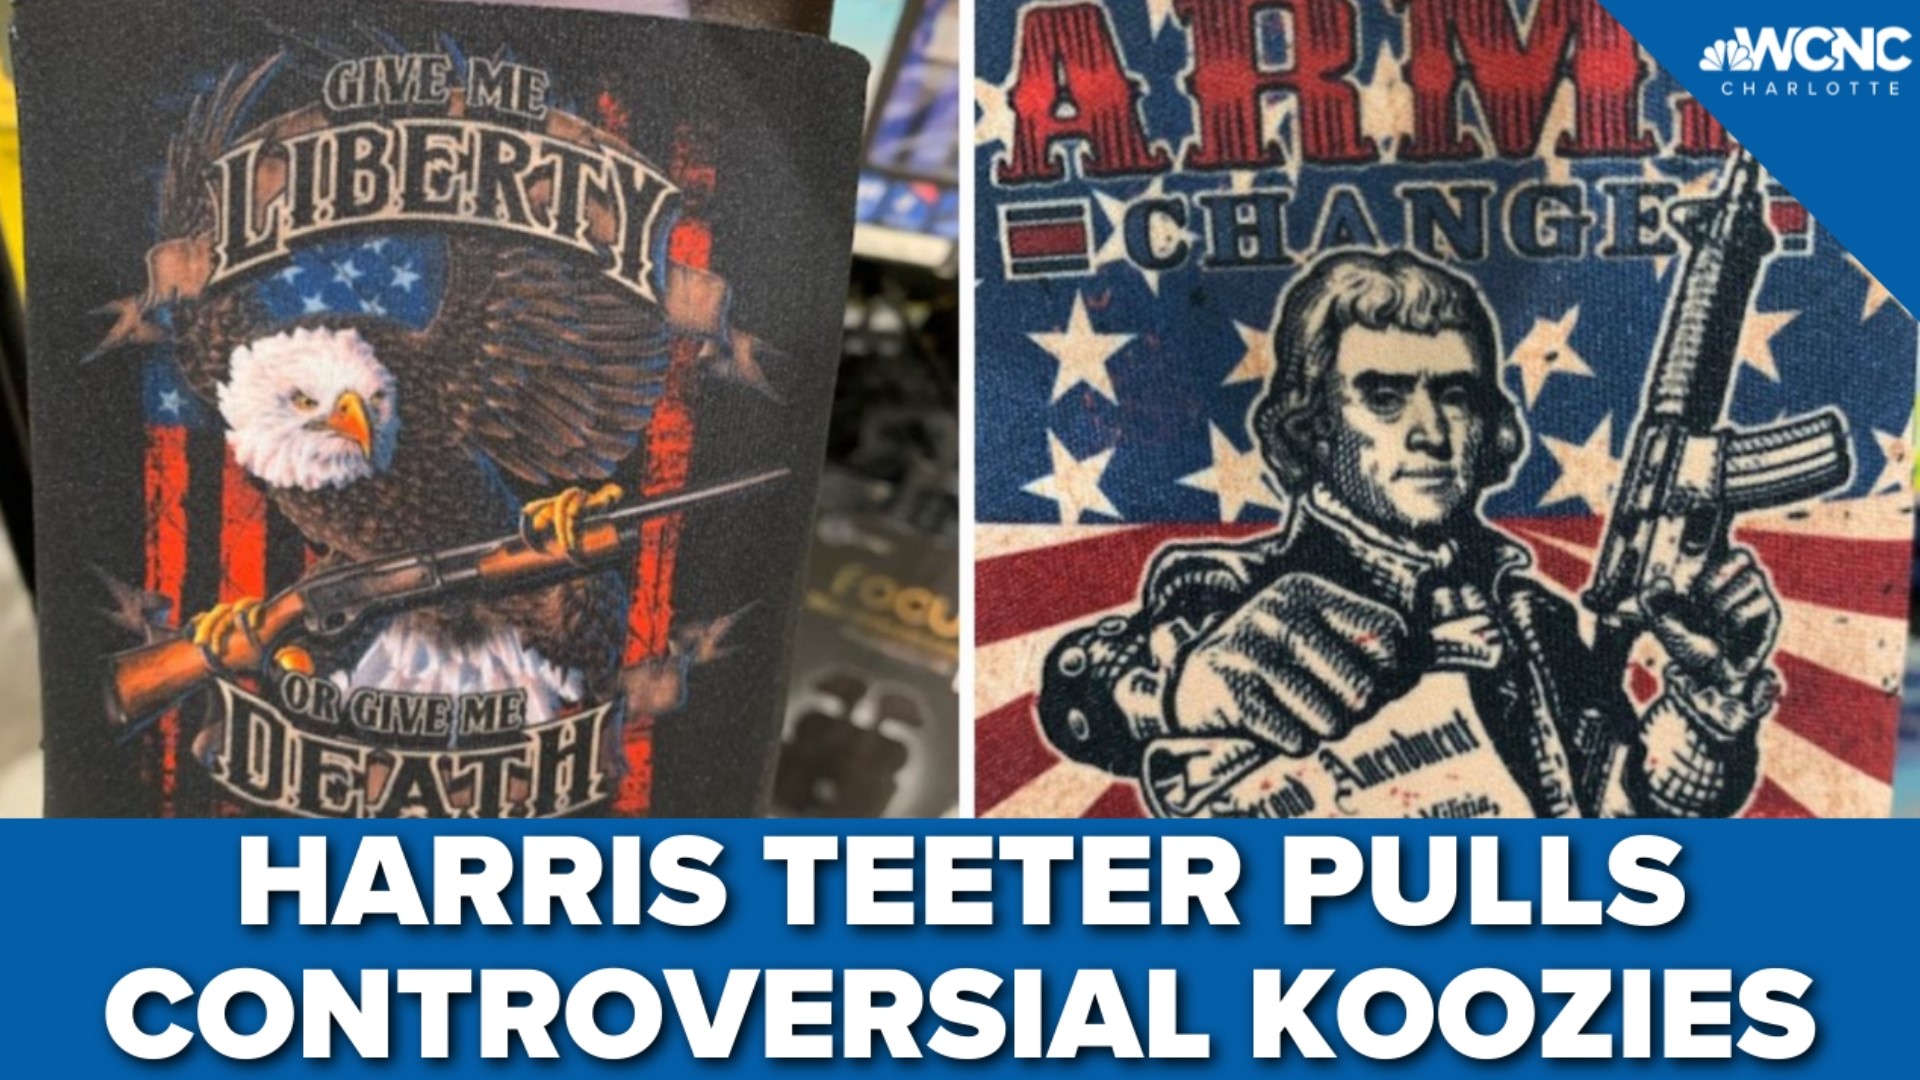 Harris Teeter said it would pull the koozies from its shelves.